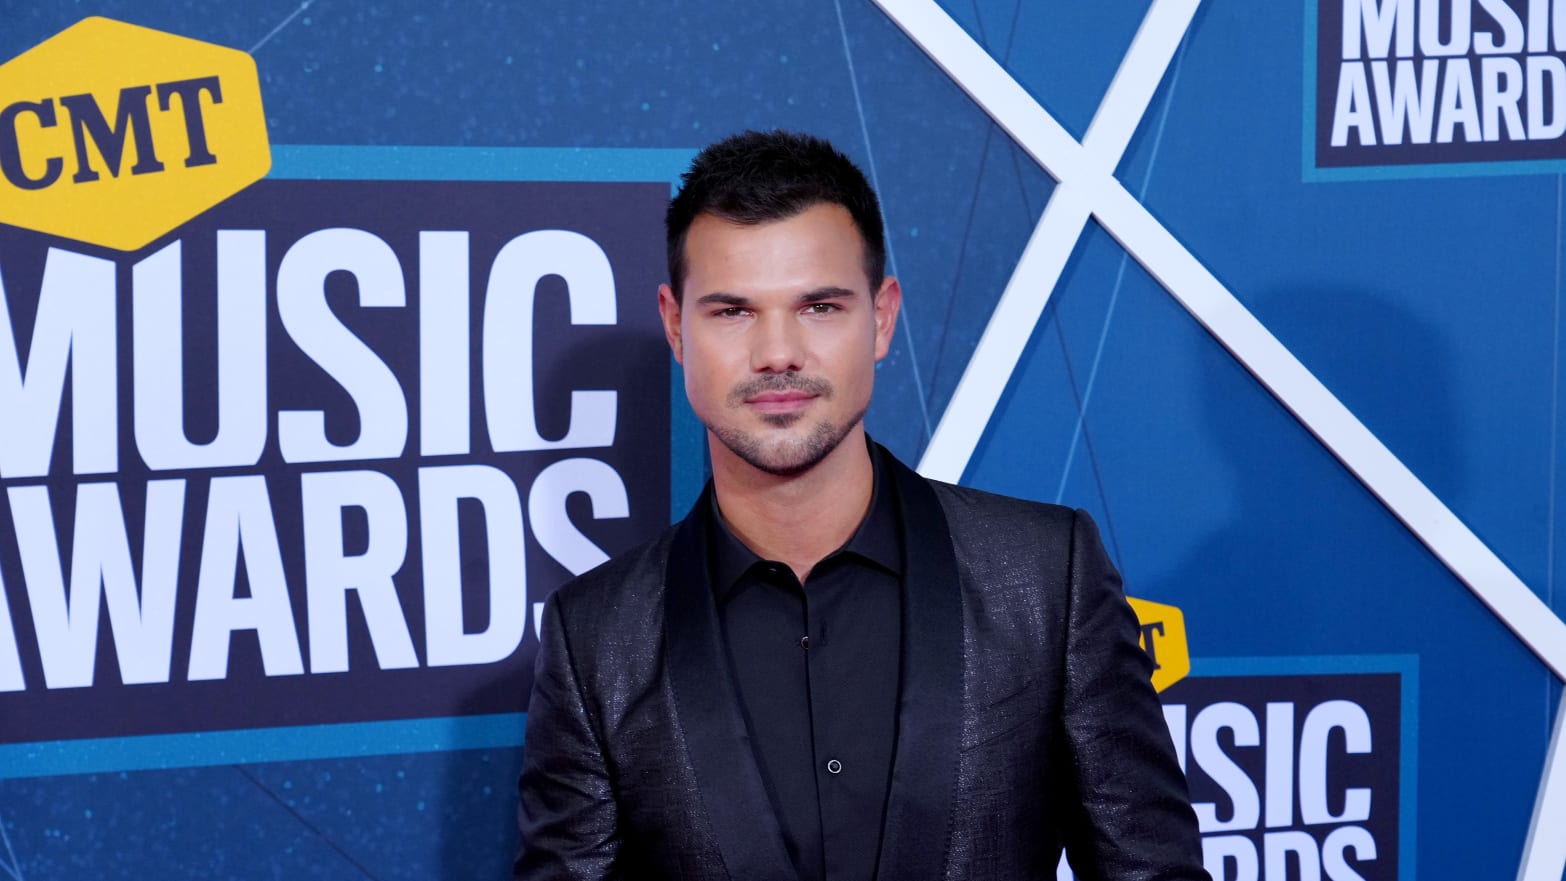 Taylor Lautner posing at the 2022 CMT Music Awards